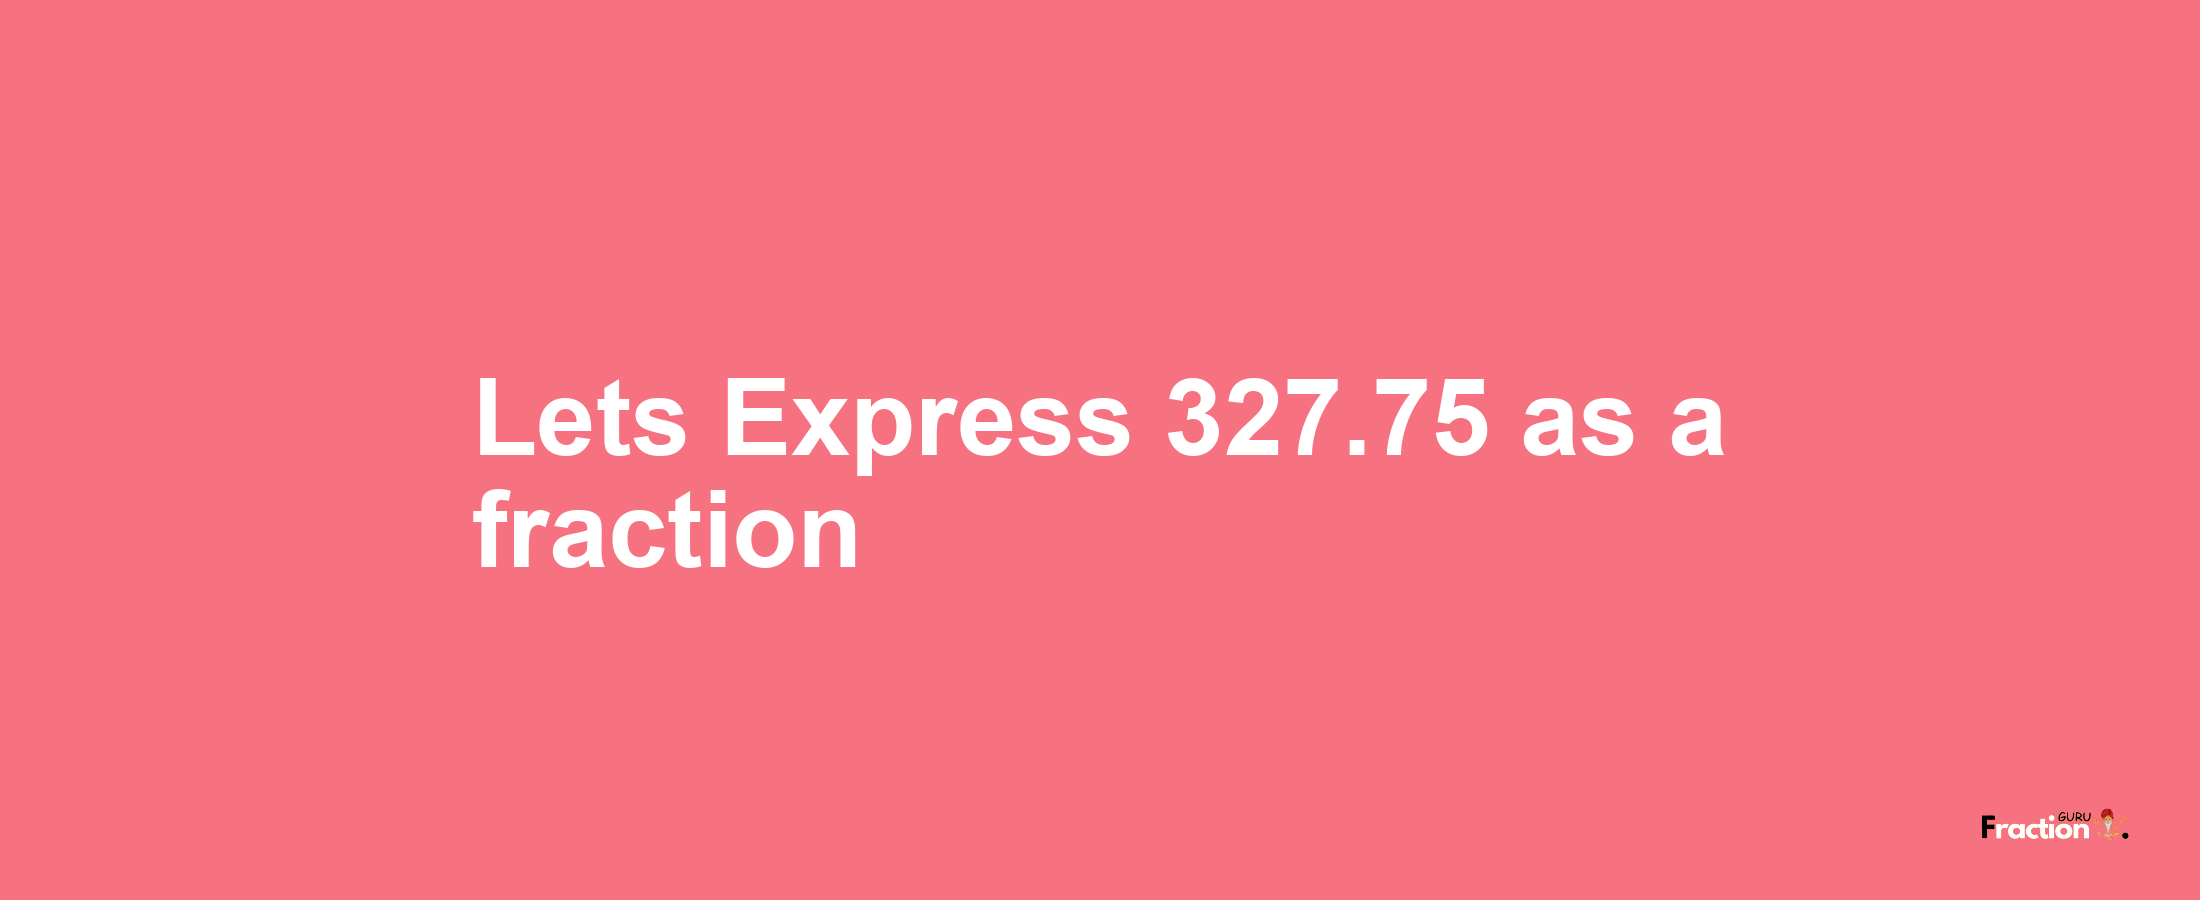 Lets Express 327.75 as afraction